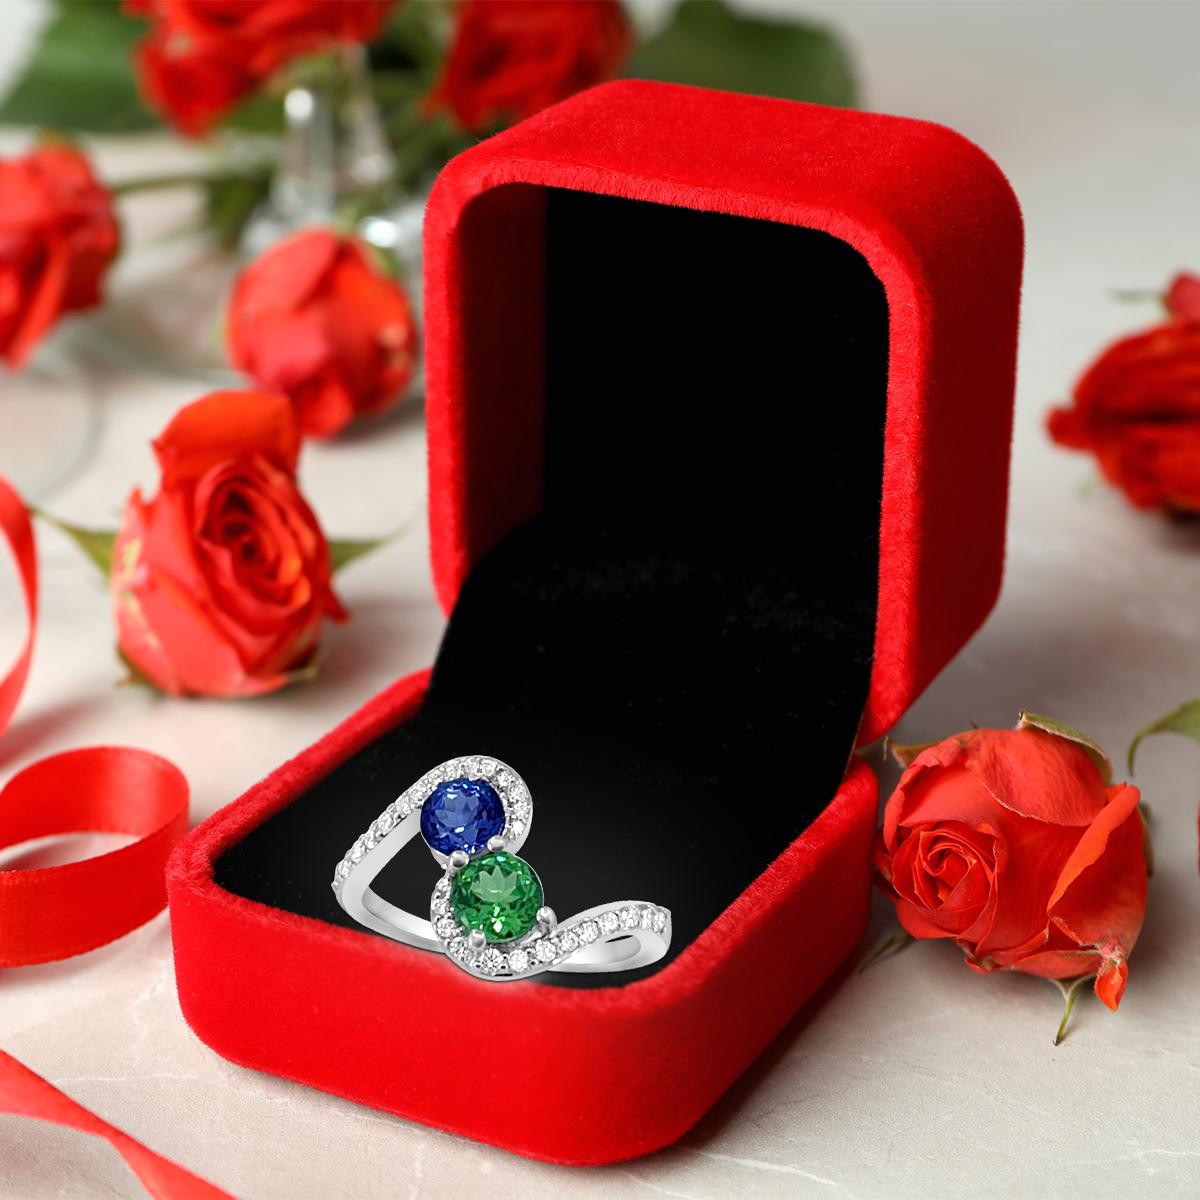 Modern 14K White Gold 1.05cts Tanzanite, Emerald and Diamond Ring. Style# R3358 For Sale